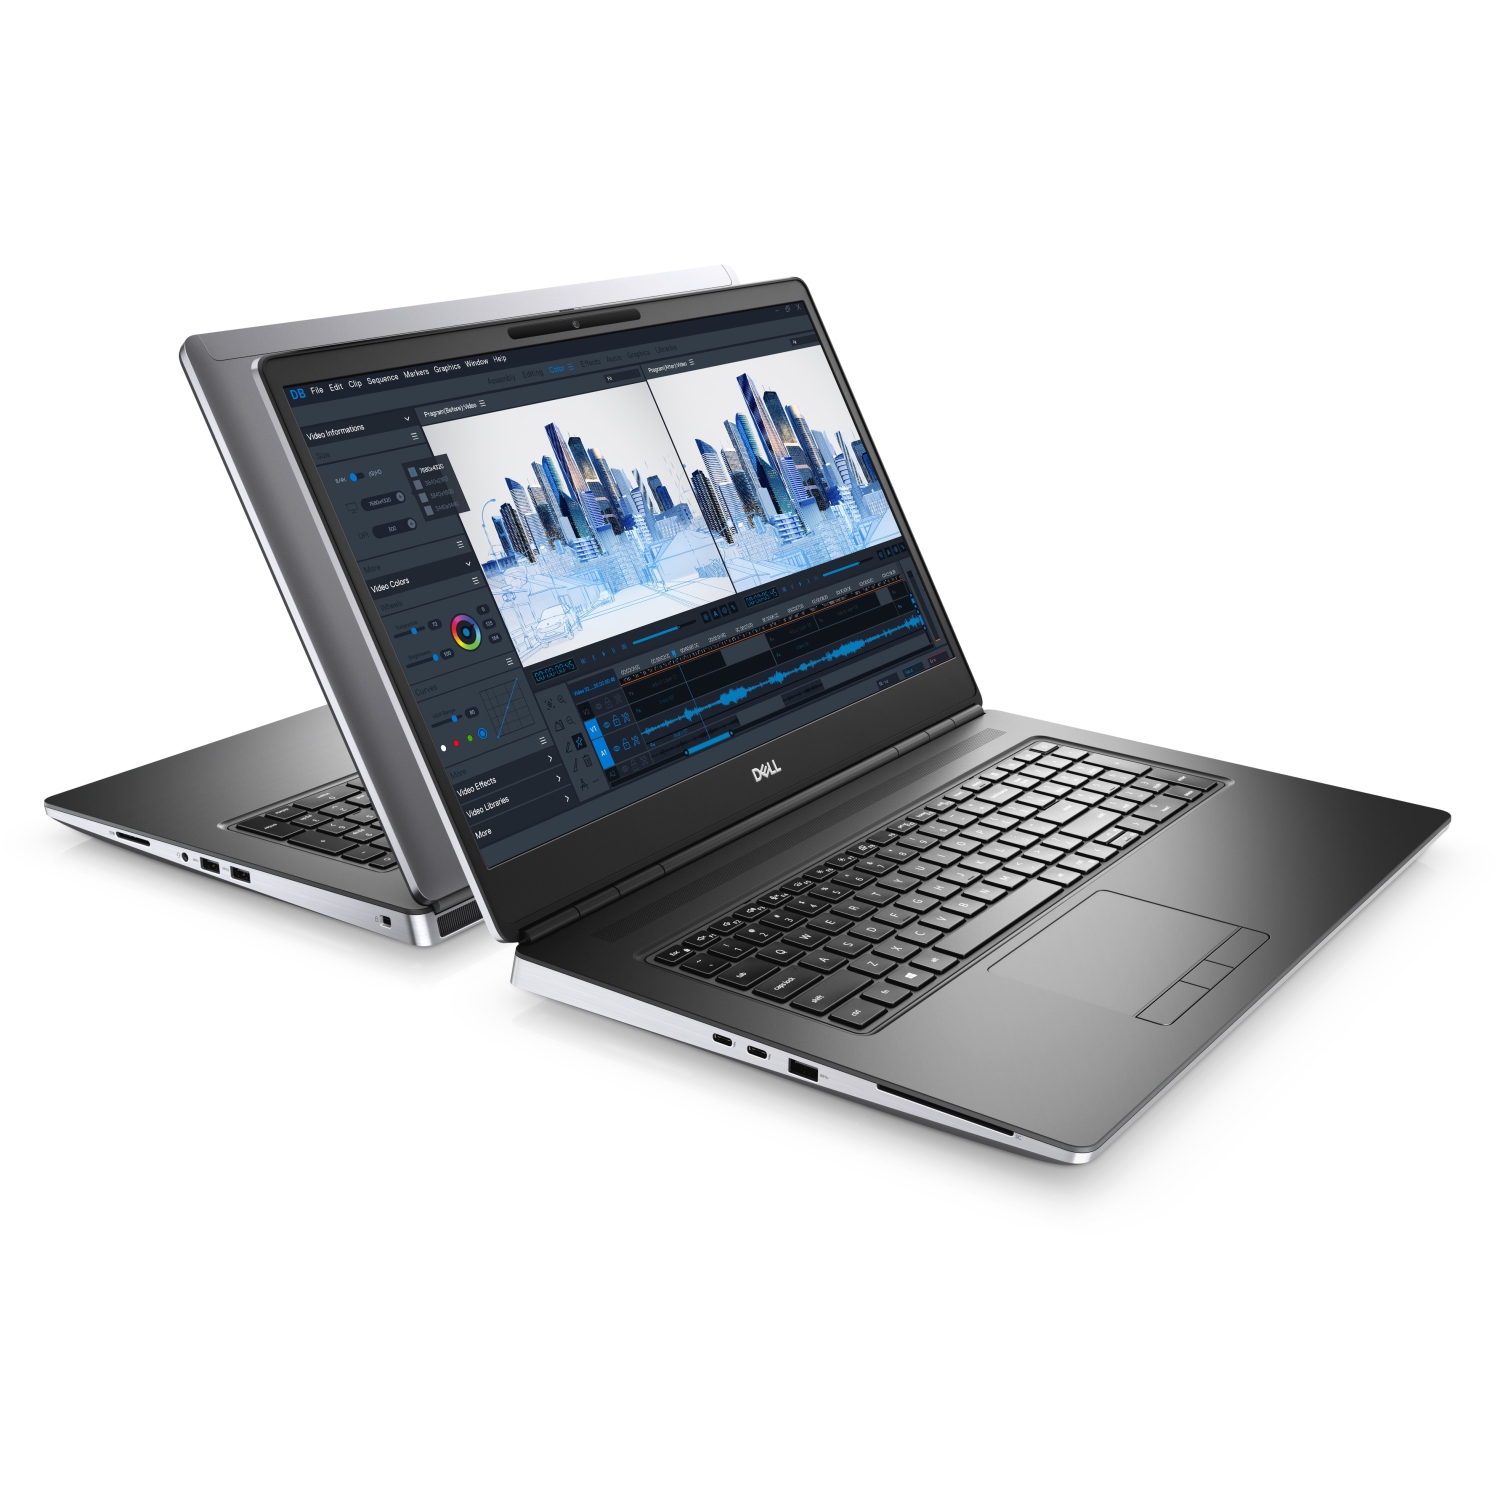 Refurbished (Excellent) - Dell Precision 7000 7760 Workstation Laptop (2021), 17.3" FHD, Core i7, 1TB SSD + 256GB SSD, 64GB RAM, RTX A4000, 4.8 GHz, 11th Gen CPU